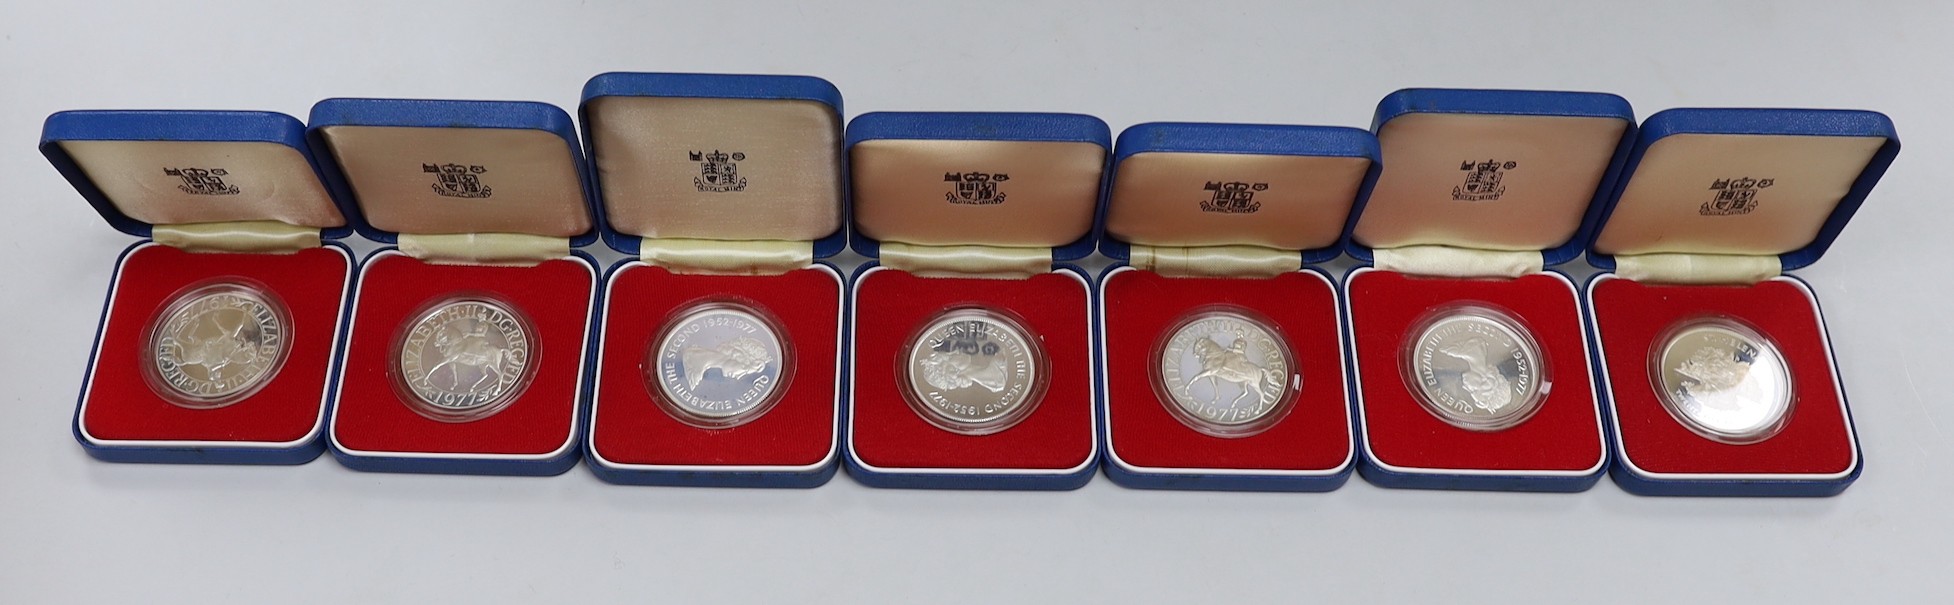 Royal Mint proof silver coins - three QEII UK Silver Jubilee crowns and four Commonwealth crowns (7)                                                                                                                        